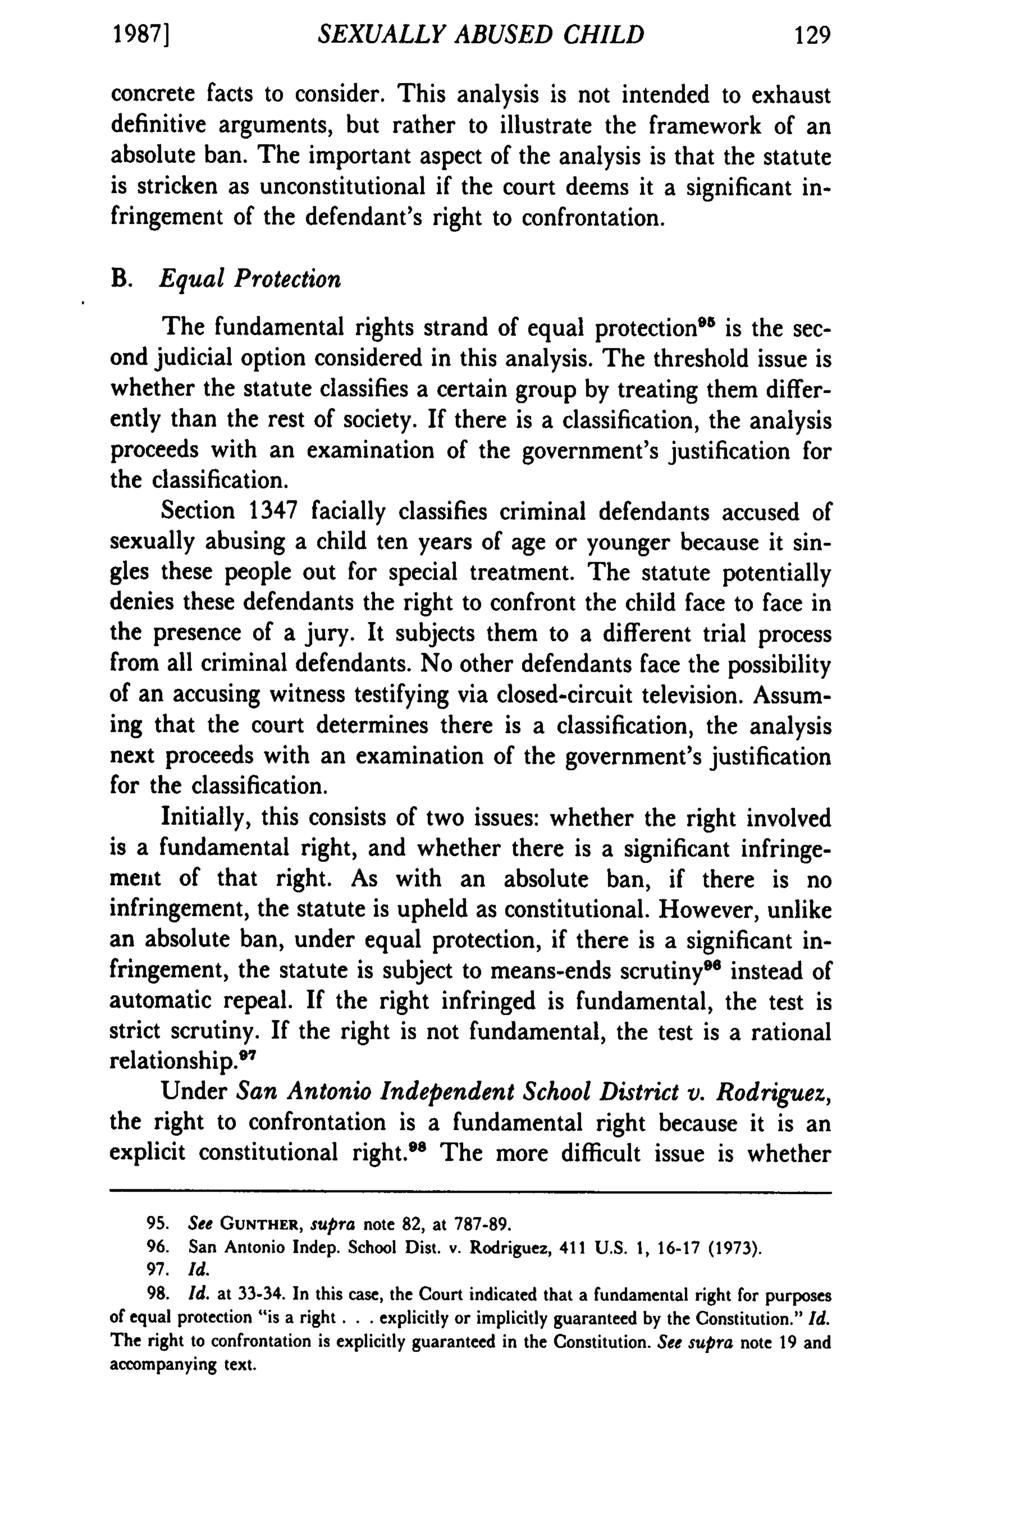 1987] SEXUALLY ABUSED CHILD concrete facts to consider. This analysis is not intended to exhaust definitive arguments, but rather to illustrate the framework of an absolute ban.